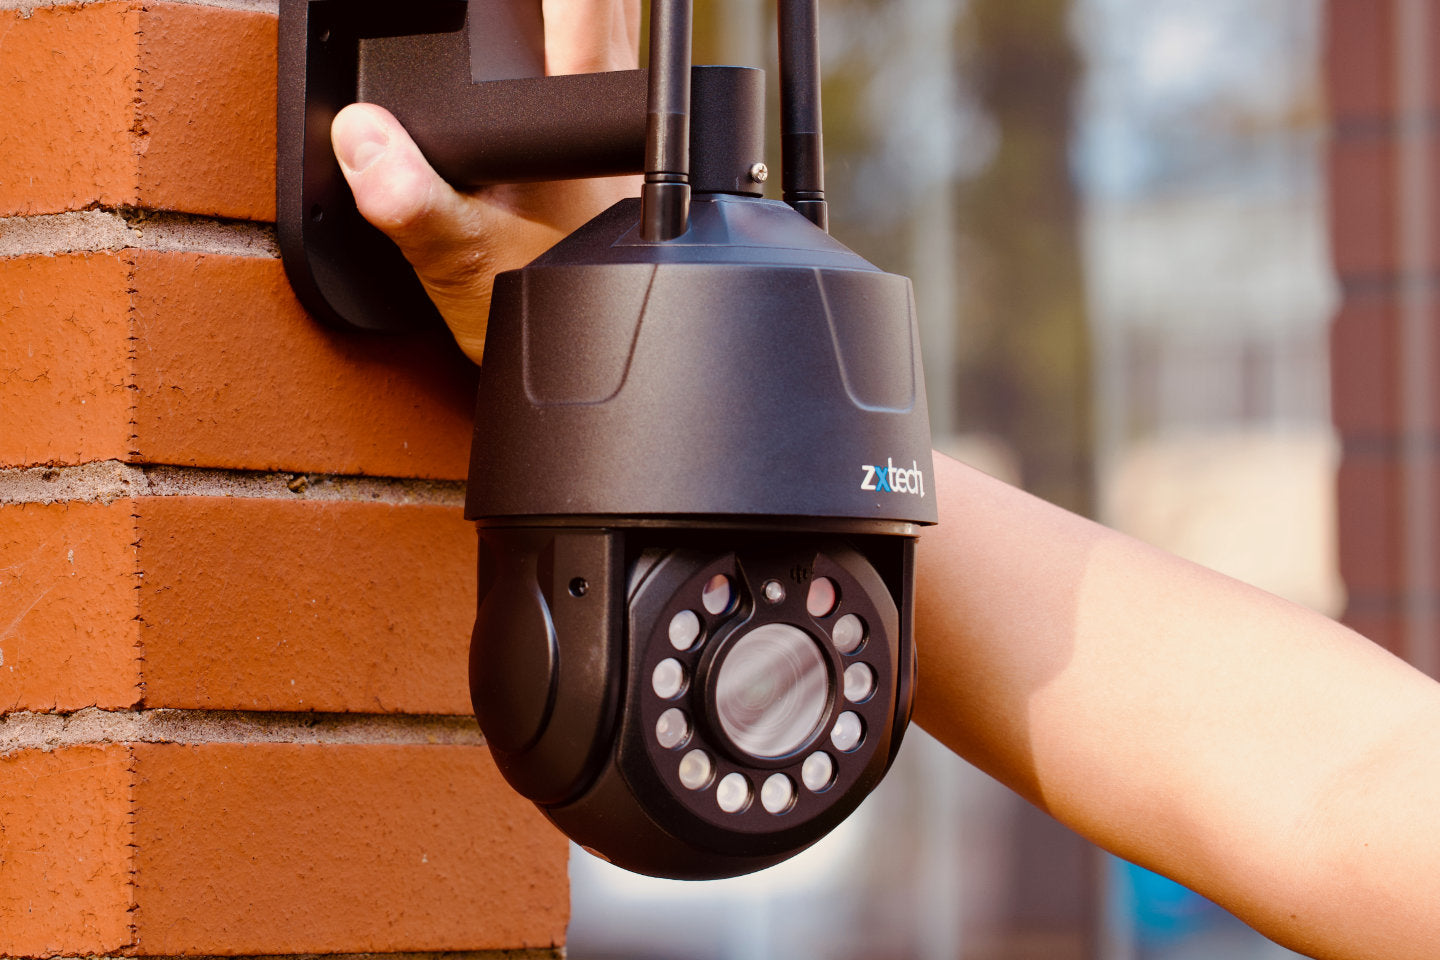 Best Wireless CCTV System for Home